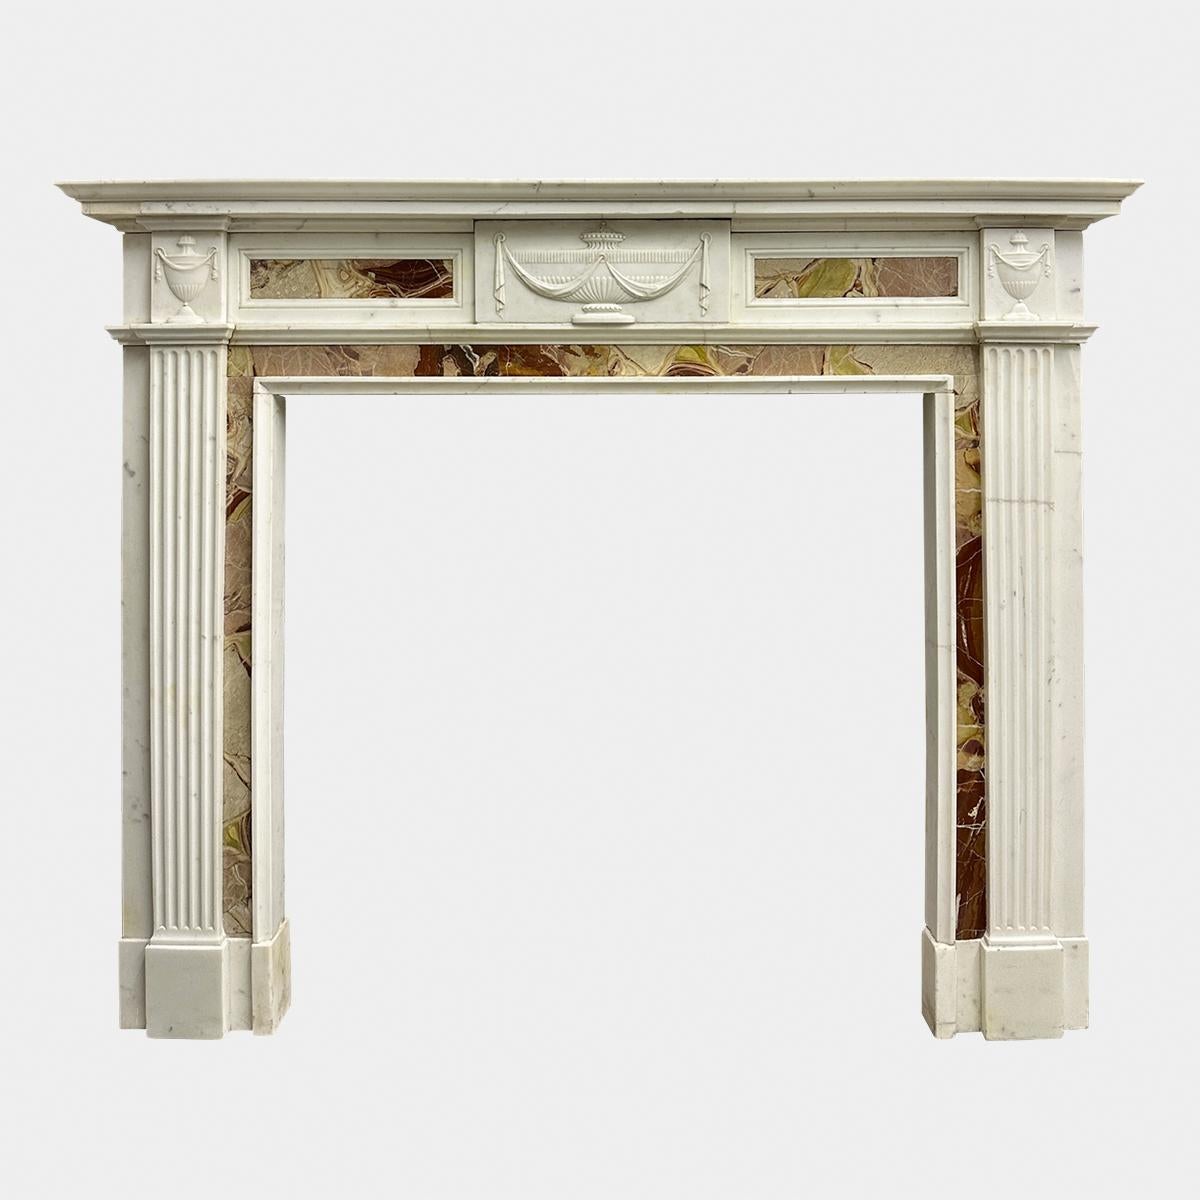 An early to mid 19th c fireplace in Statuary white and jasper marbles. The fluted pilaster jambs stood on foot blockings, with Jasper marble ingrounds, surmounted by carve corner blocks of classical urns and drapery. The frieze with centre tablet of